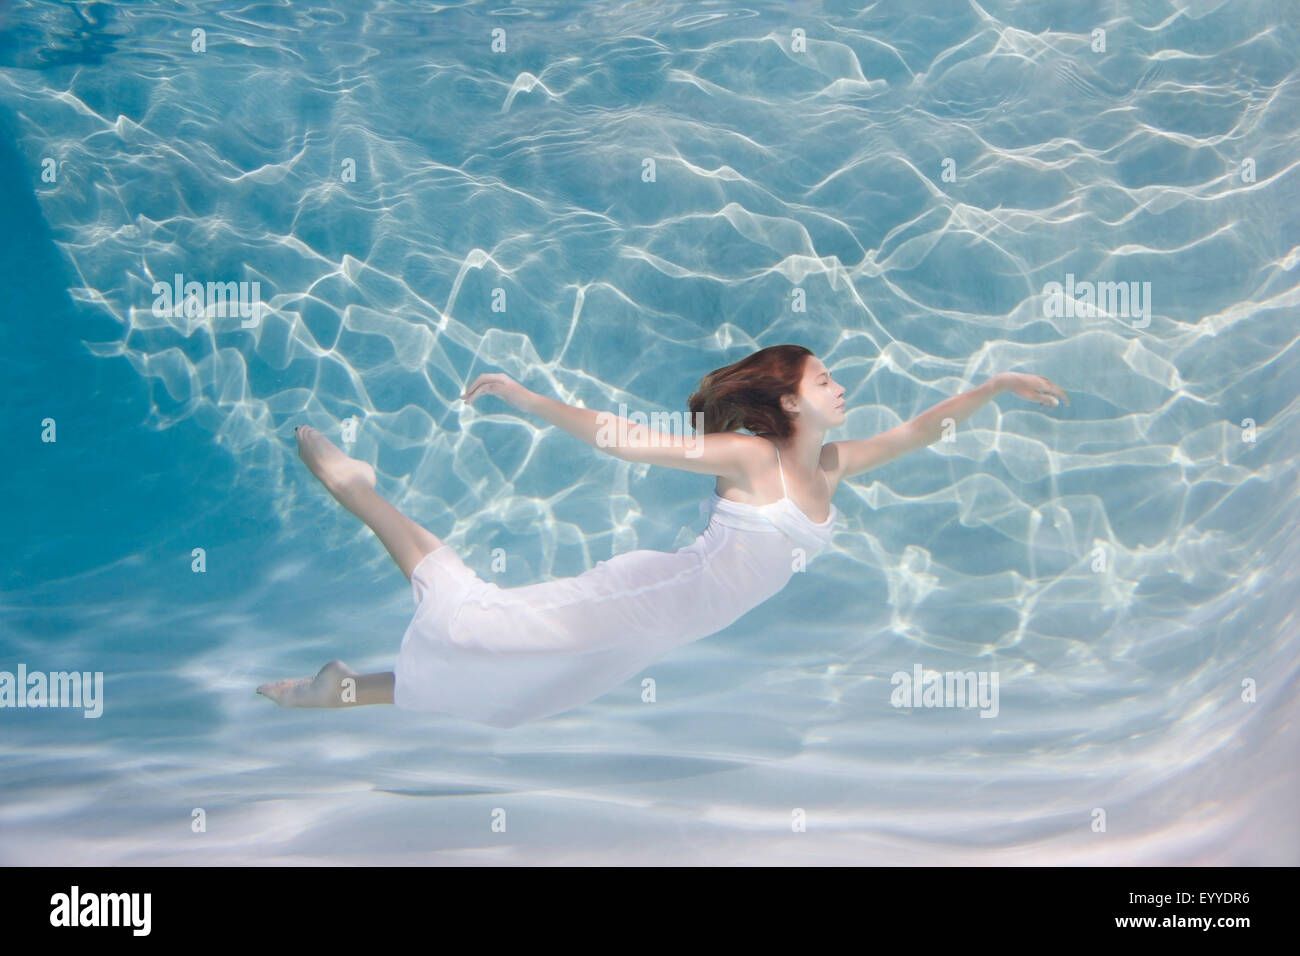 Underwater view of Caucasian woman in dress swimming in pool Stock Photo